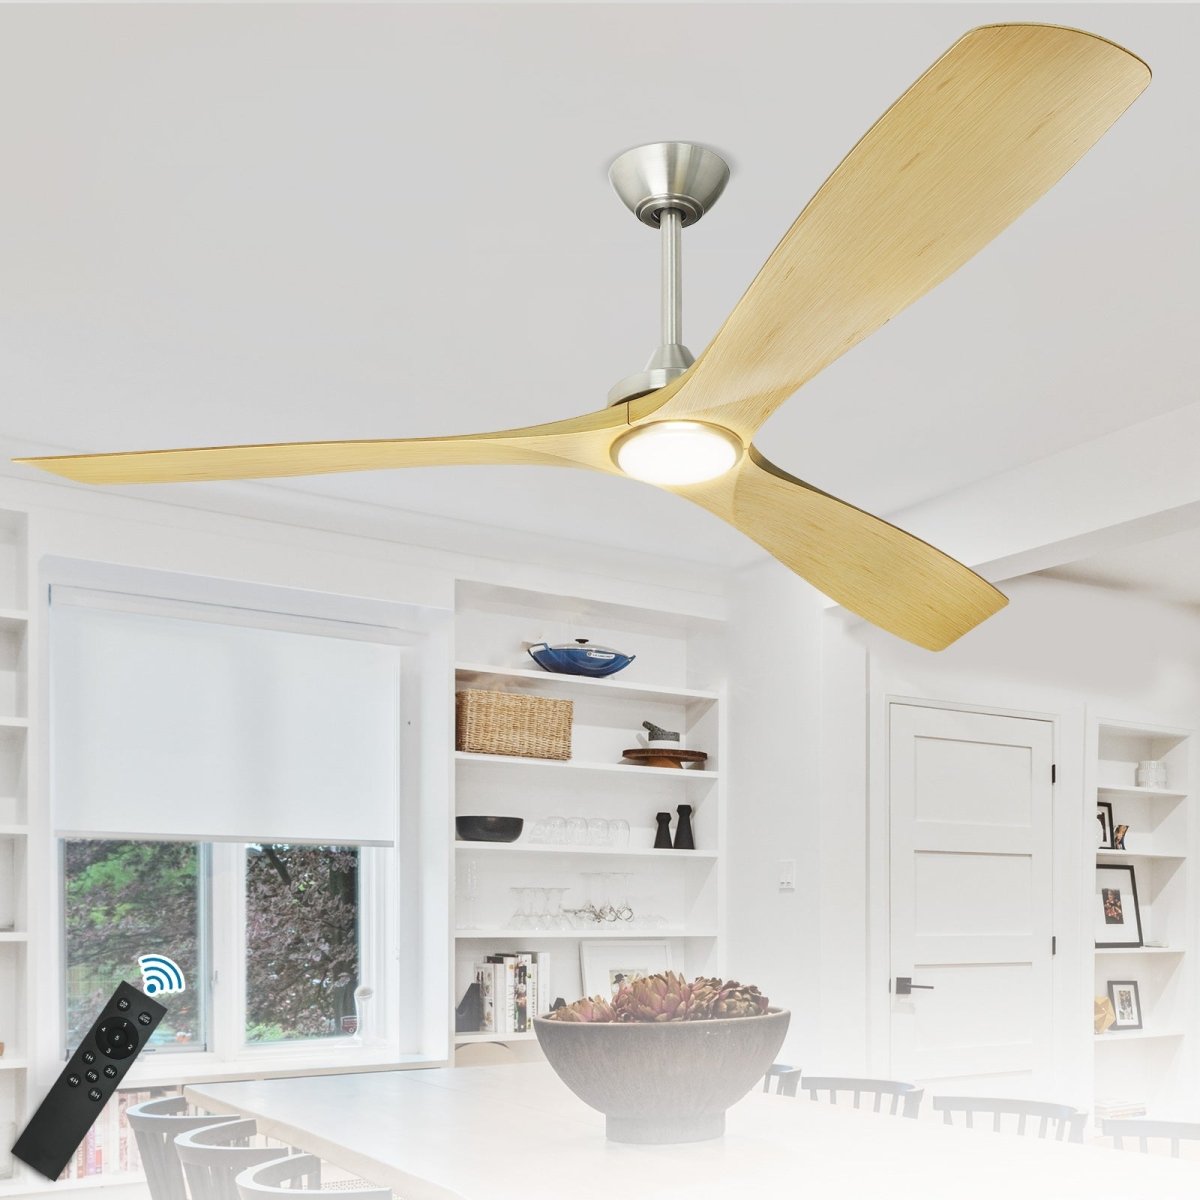 Depuley 60 Inch Low Profile Ceiling Fan with Lights 3 Blade Fan with Noiseless Reversible Motor, Ceiling Fan with Remote Control for Indoor living Room, Kitchen, Bedroom,Outdoor Covered Patio - WS-FPZ41-18C-NE 1 | DEPULEY